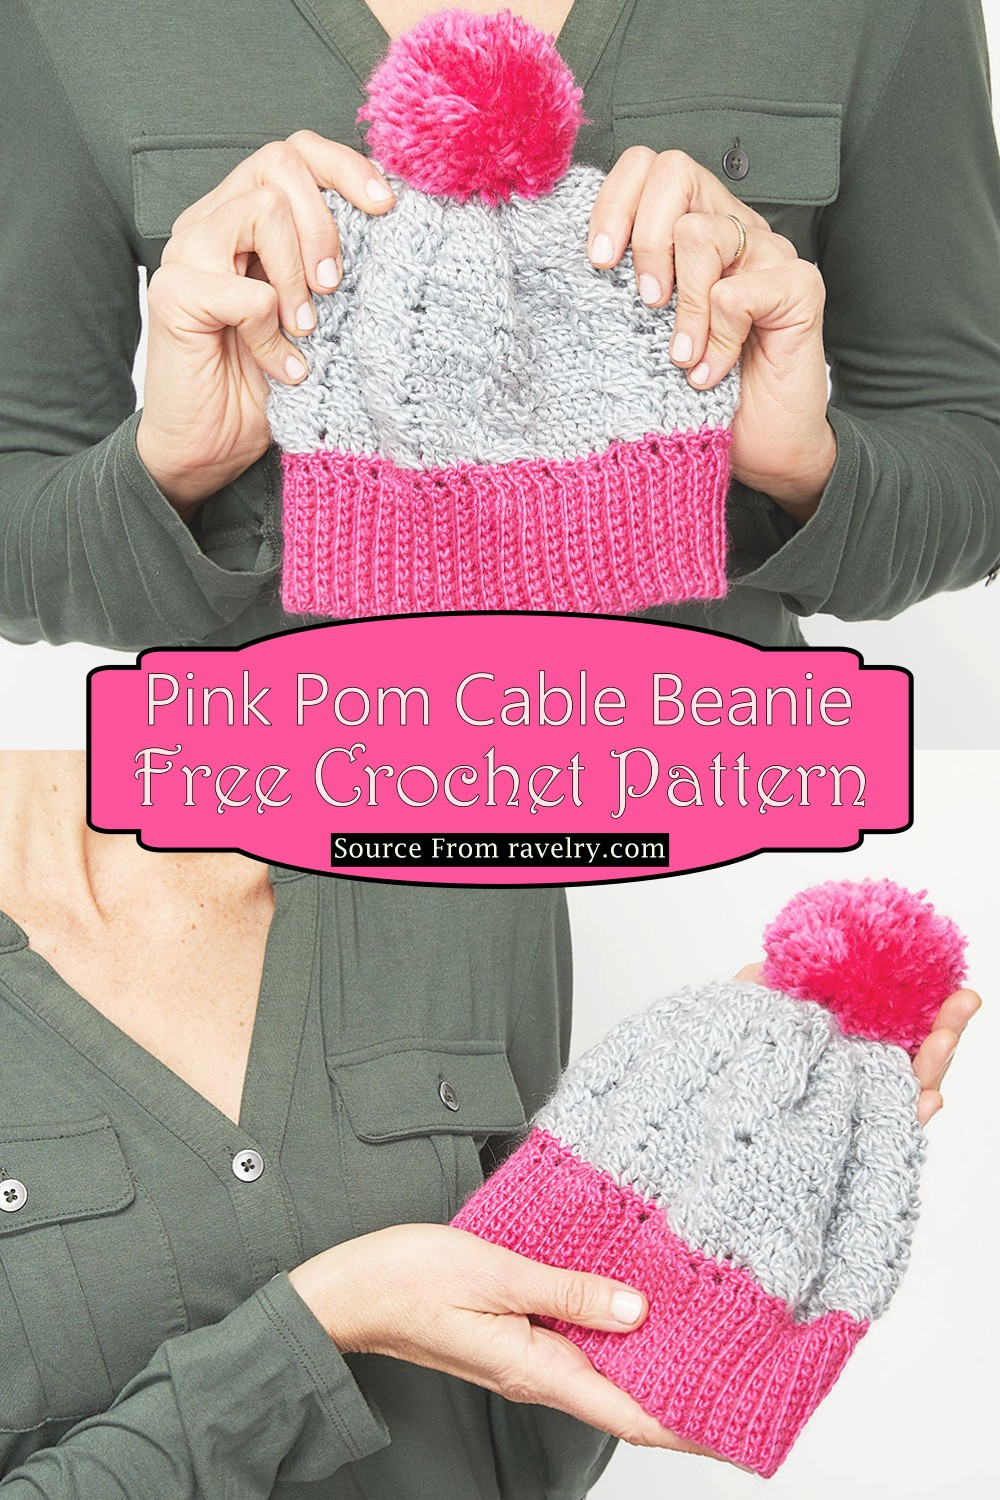 Pink Pom Cable Beanie